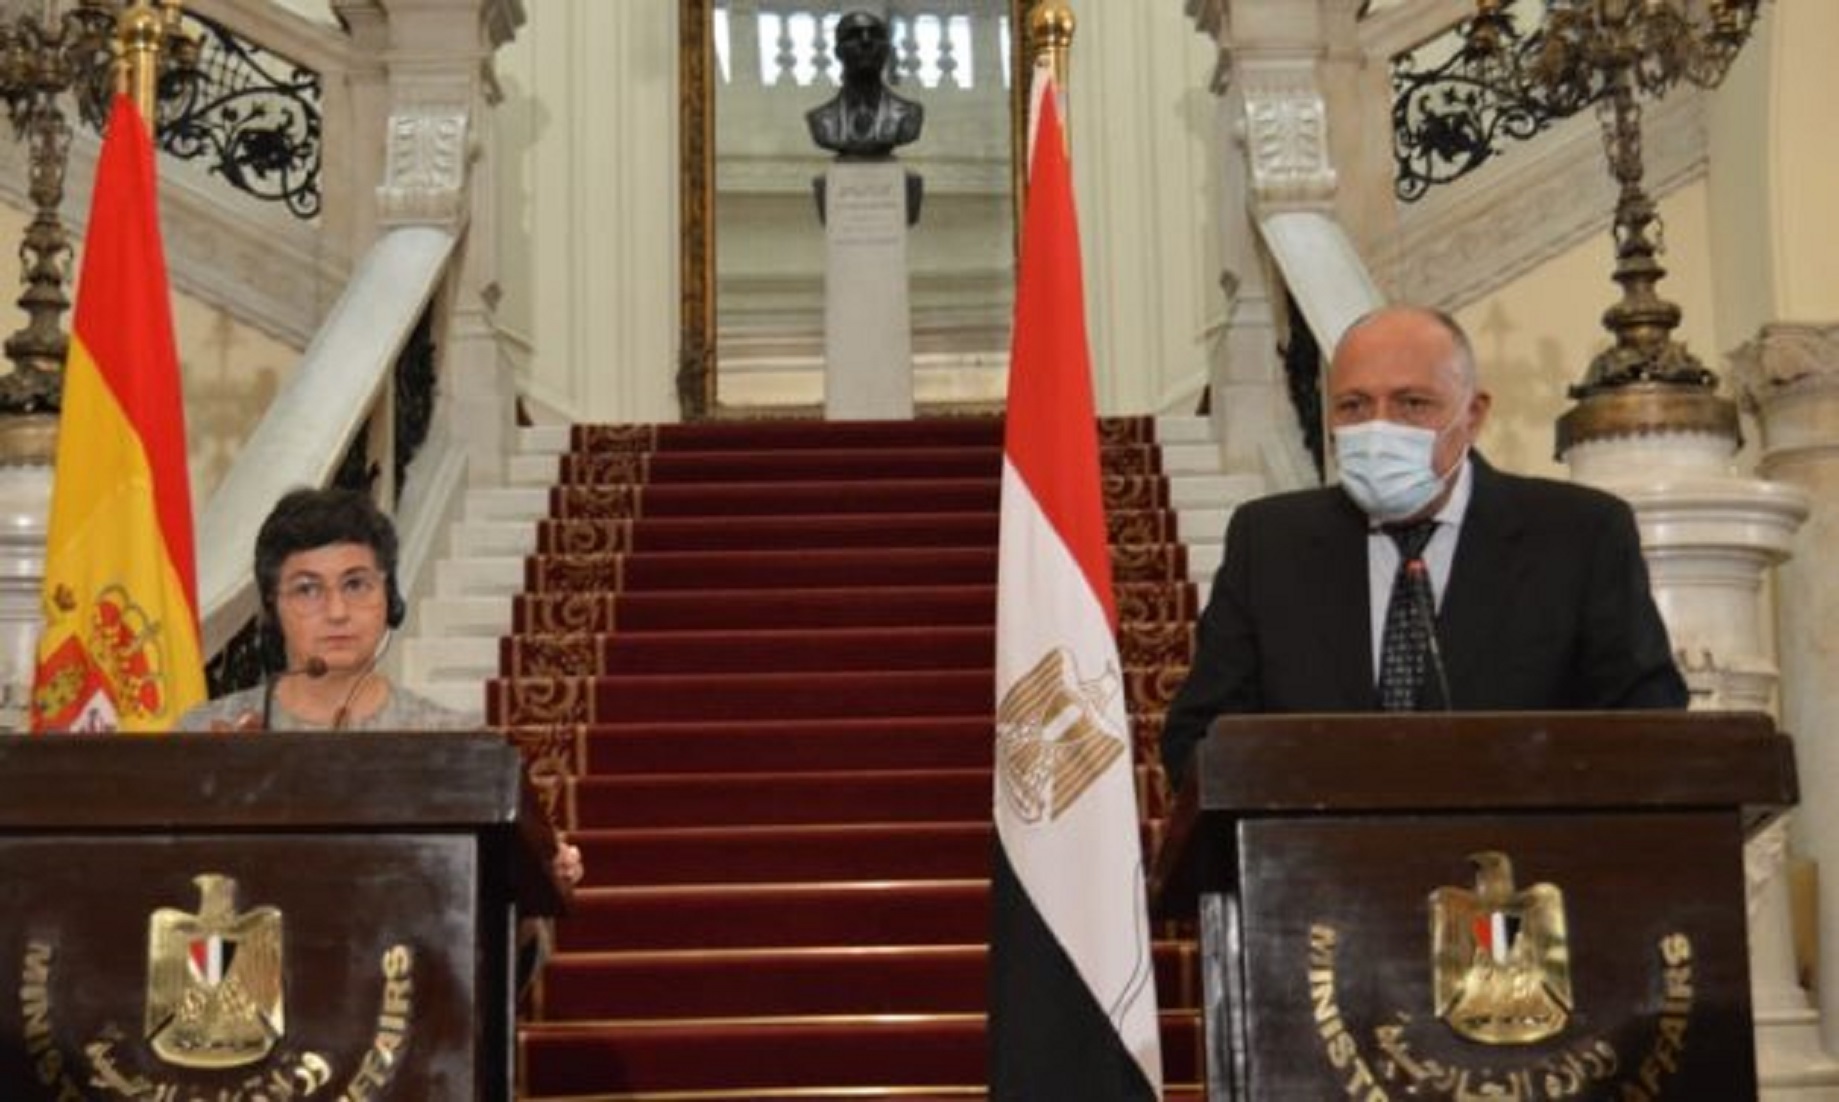 Egypt, Spain FMs Discuss Regional Issues, Sign MOU For Political Consultation